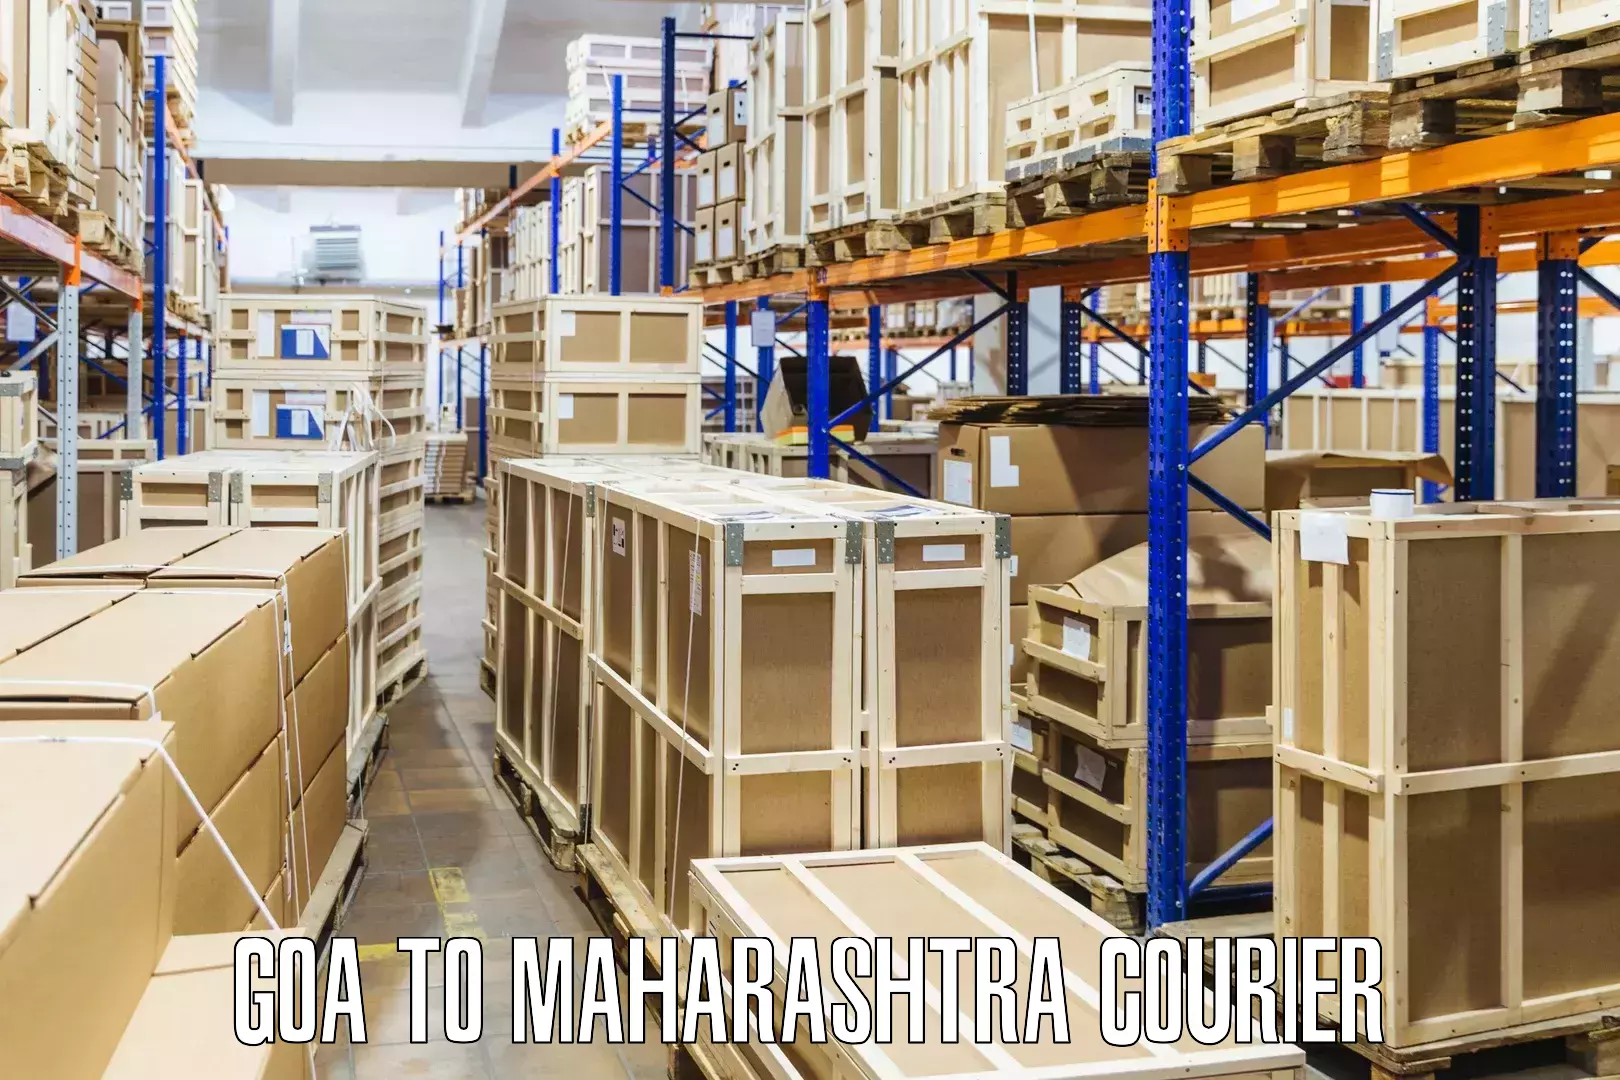 Package delivery network Goa to Maharashtra